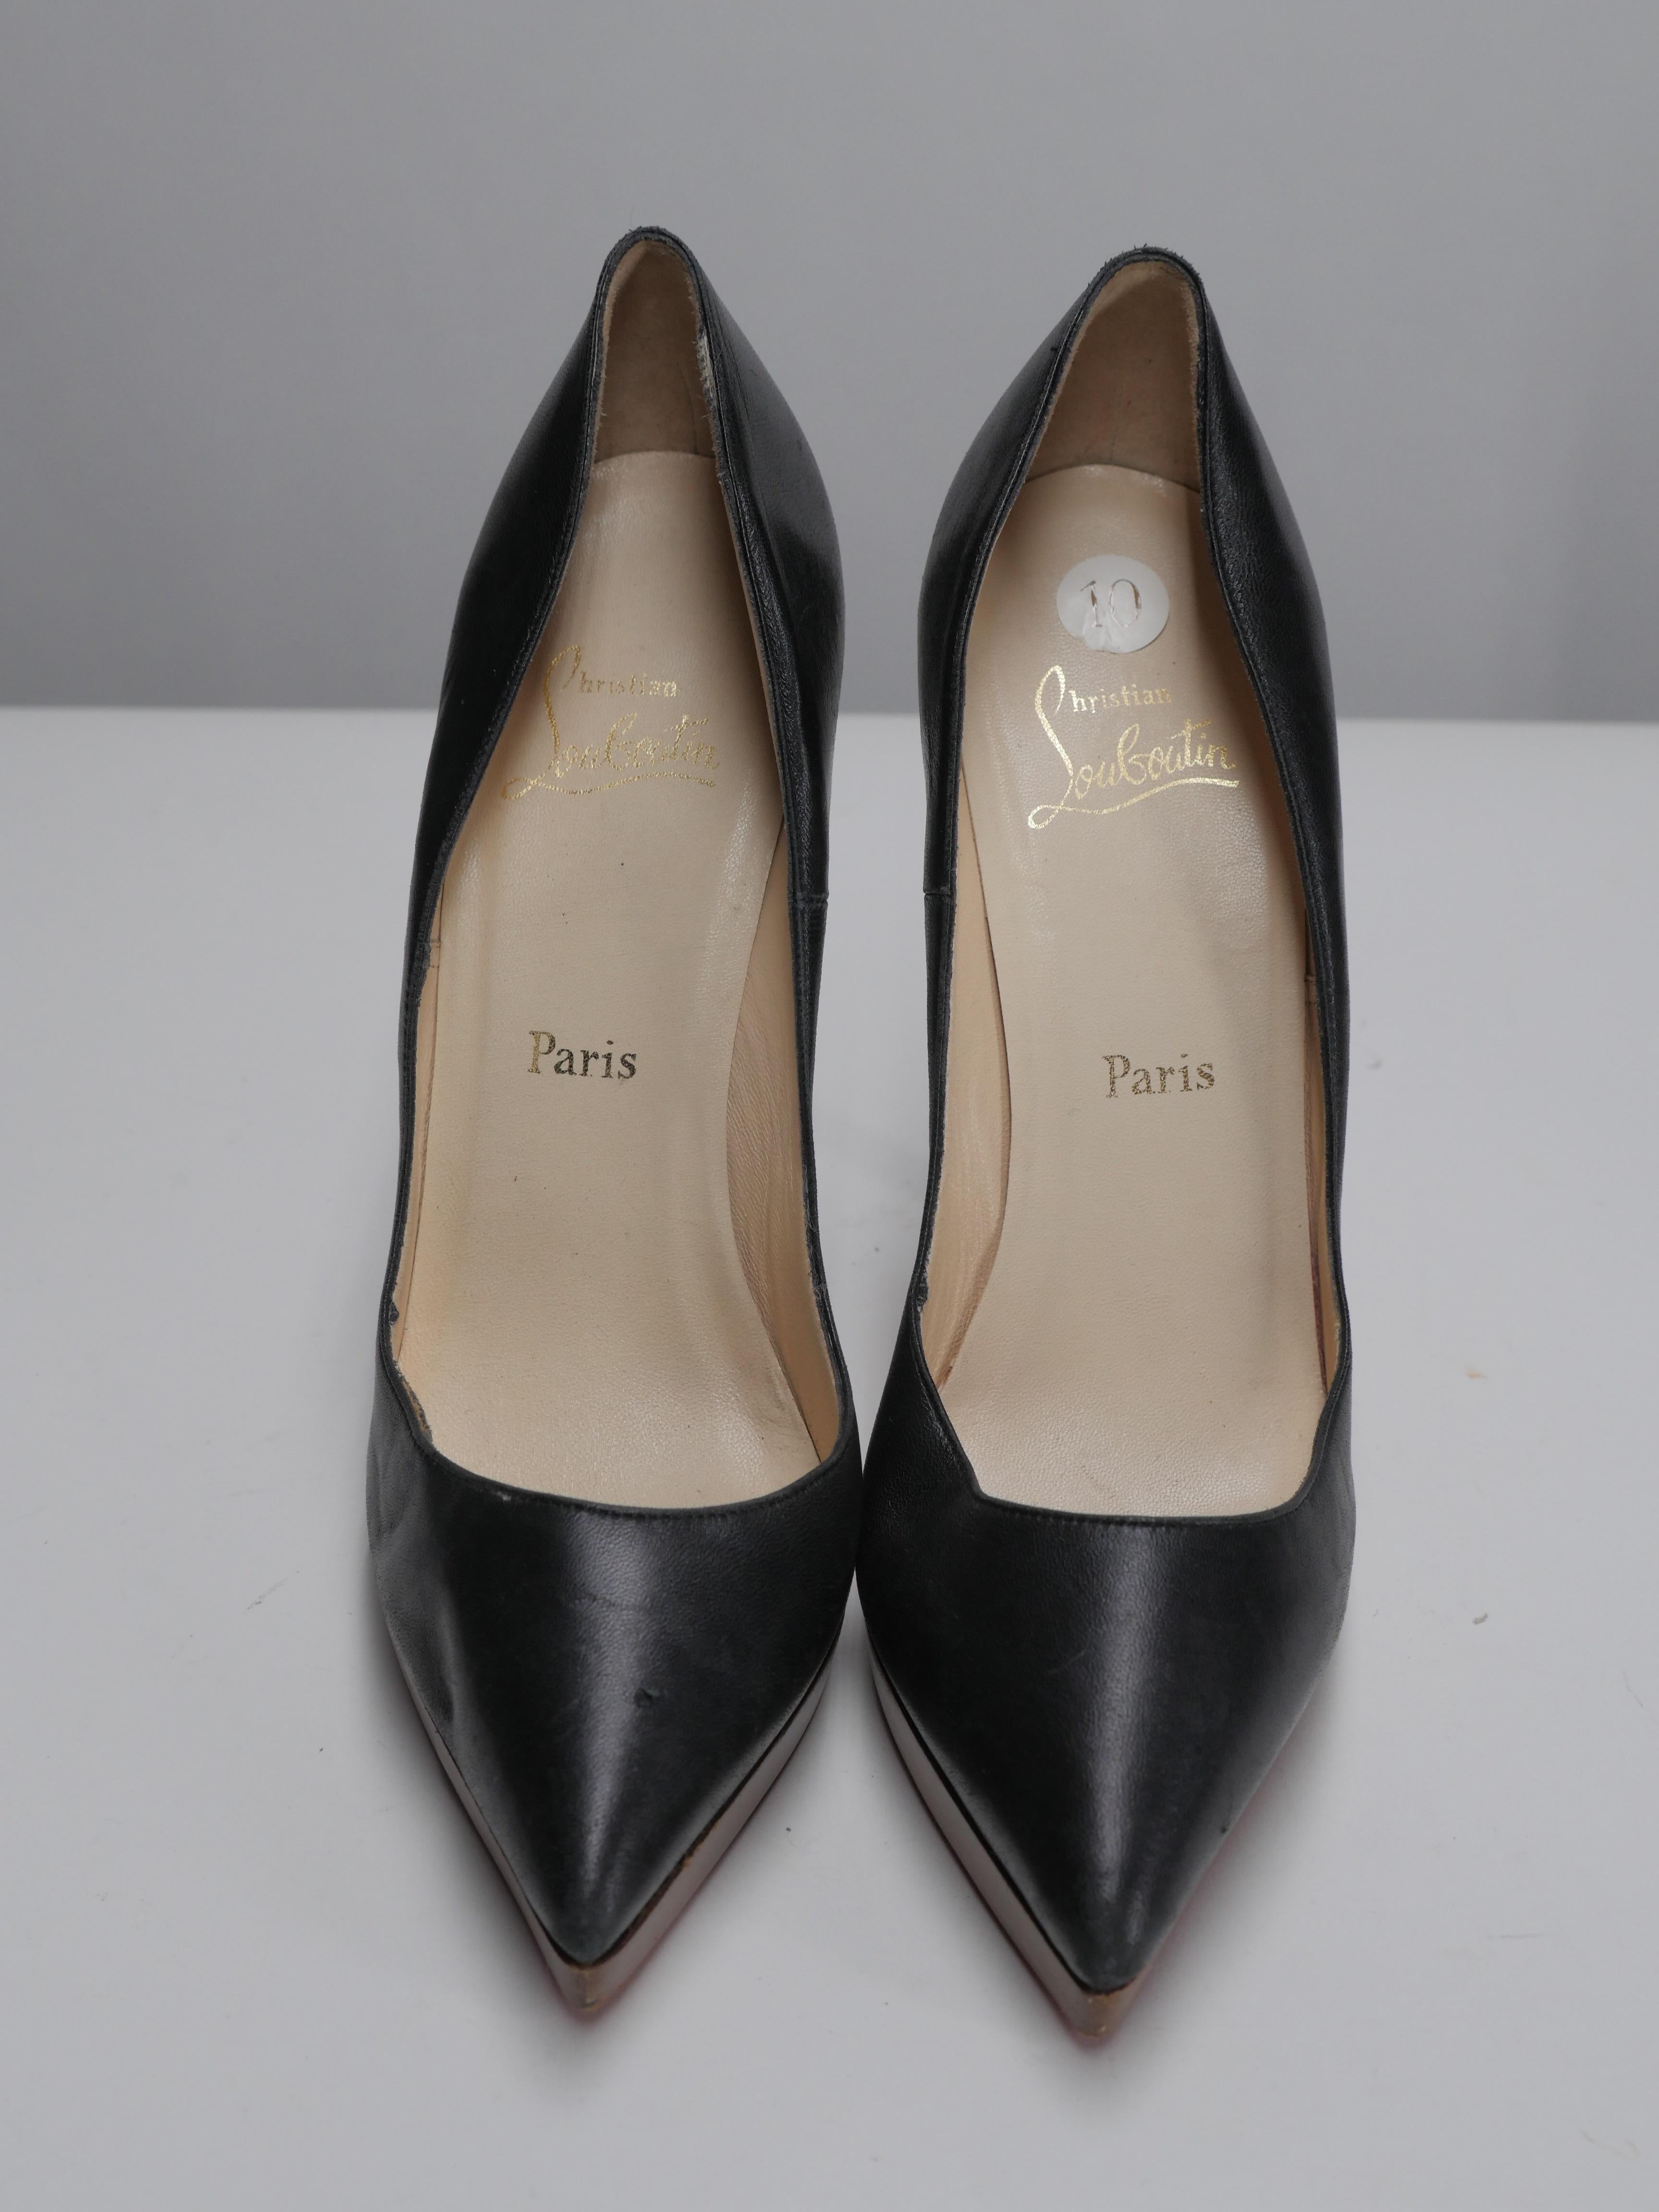 Classic Leather Pointed Toe Pumps w/ Stacked Wooden Heel